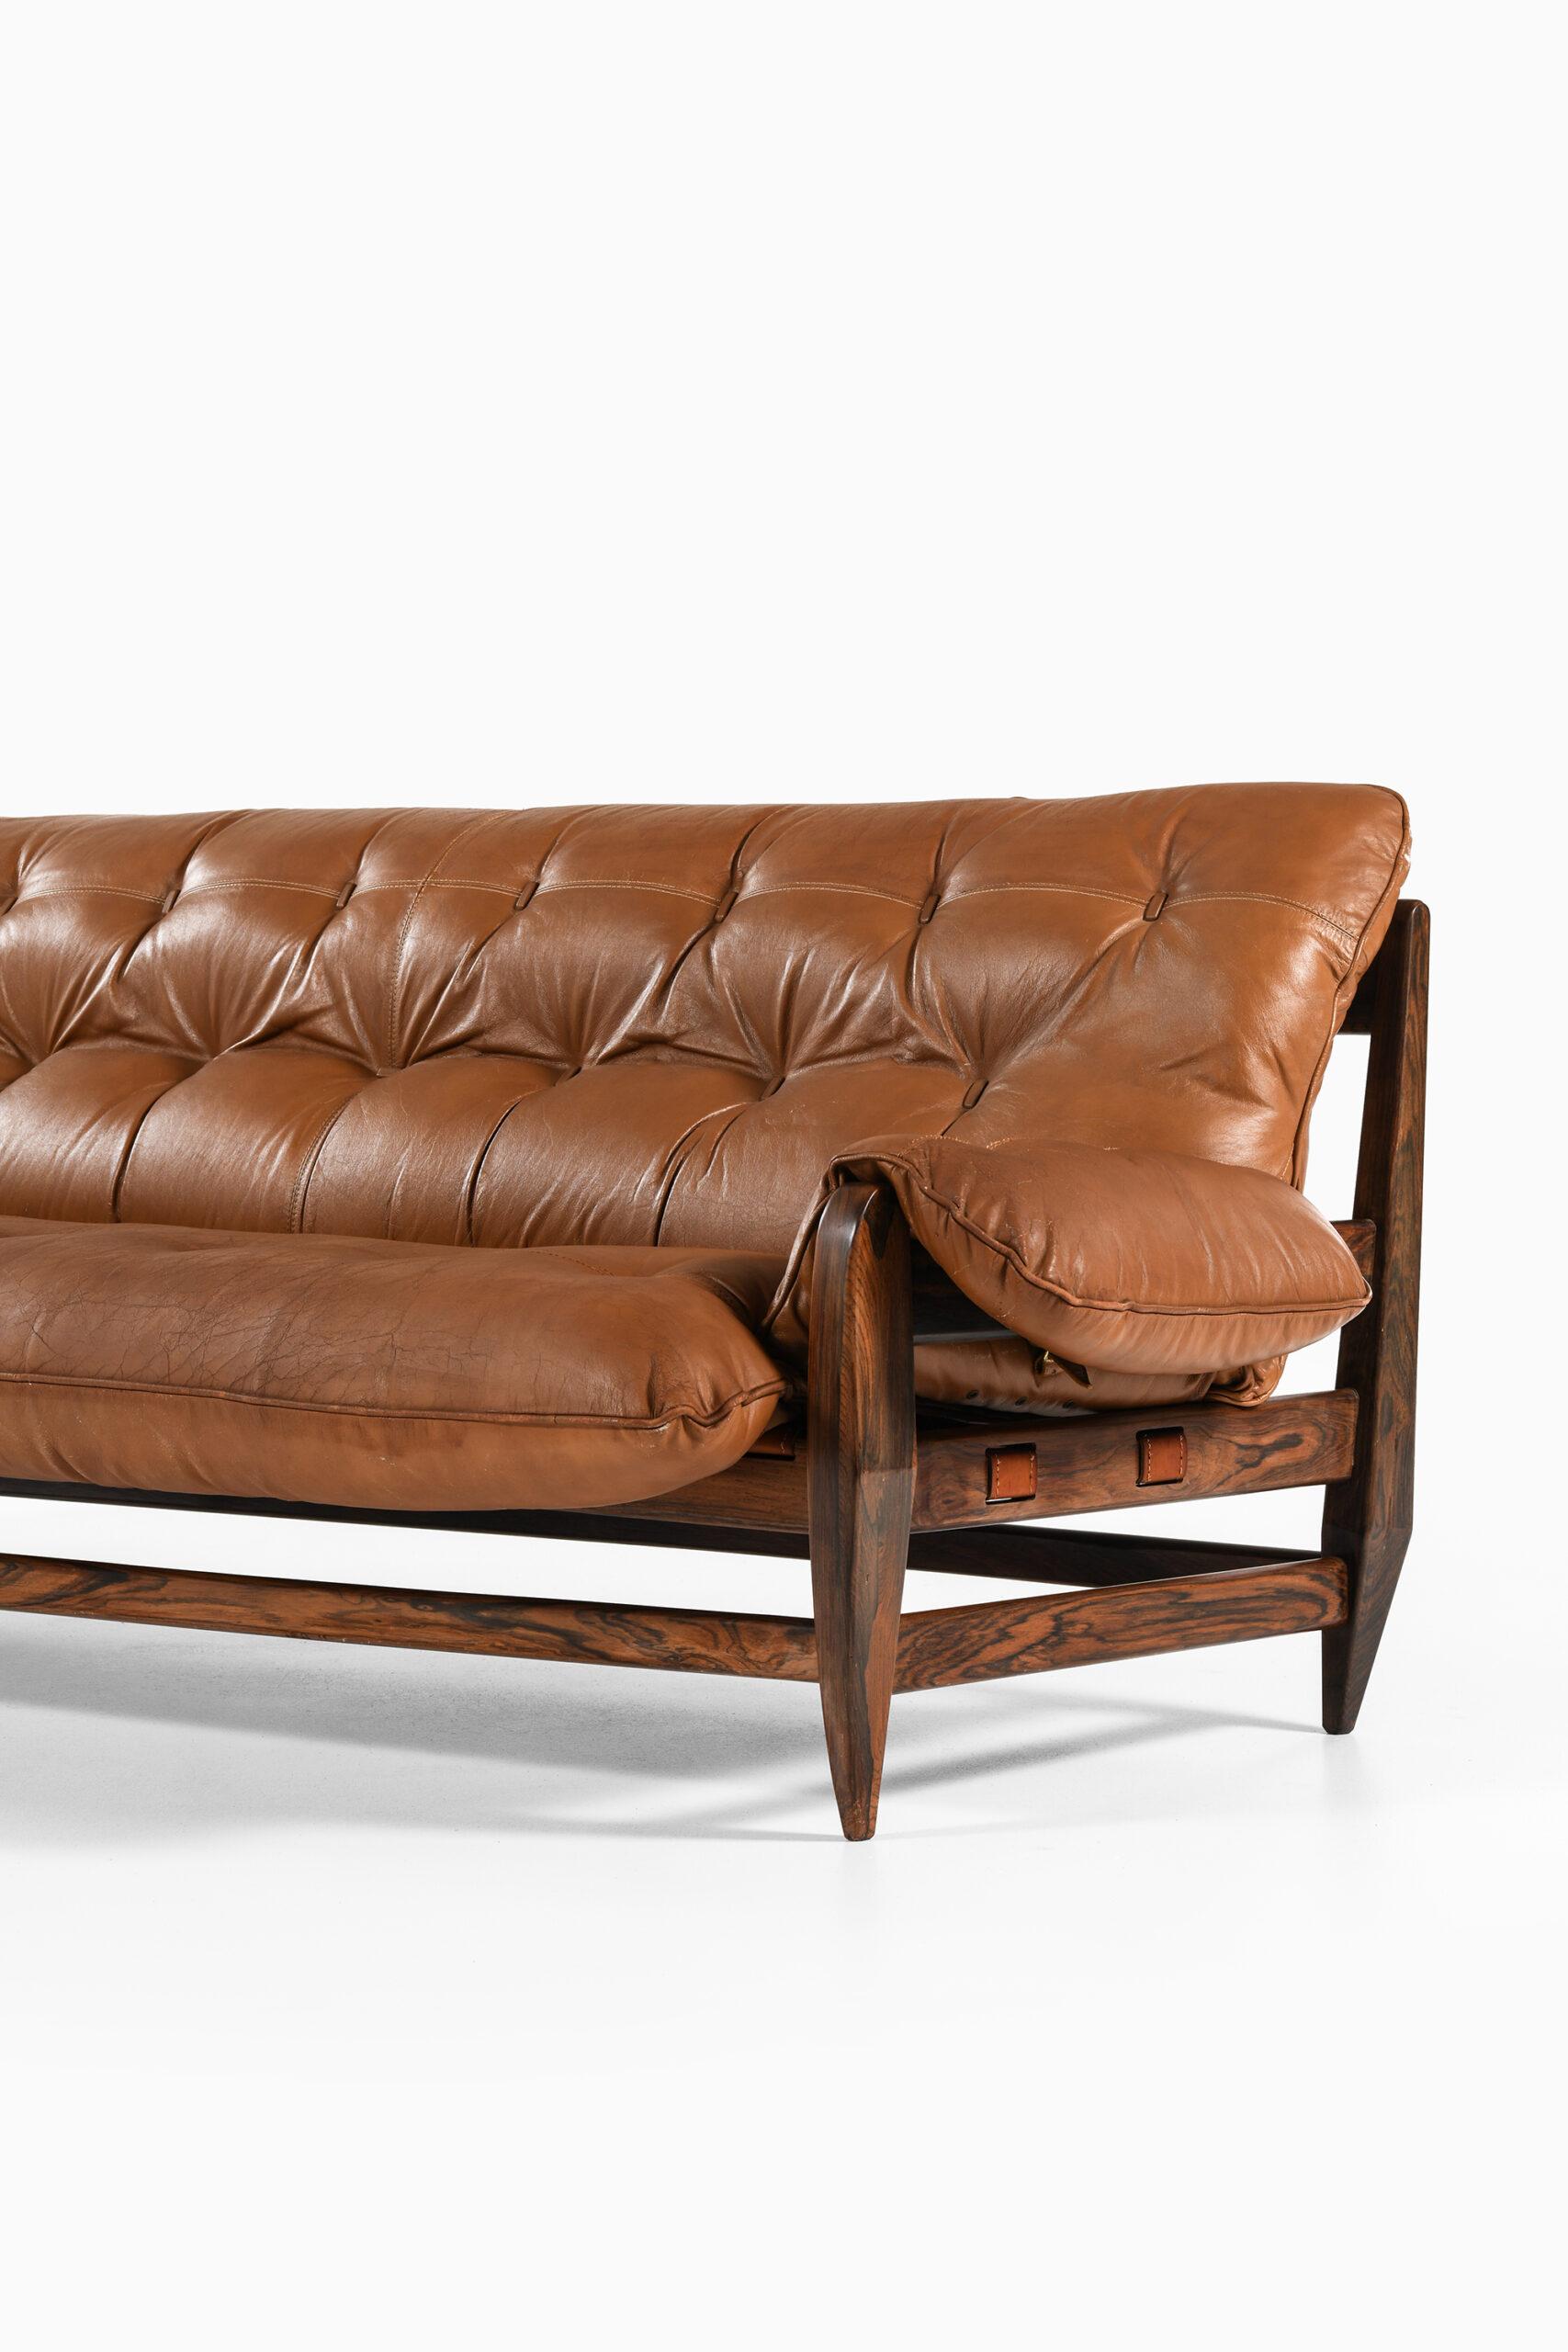 Brass Jean Gillon Sofa Produced by Wood Art in Brazil For Sale